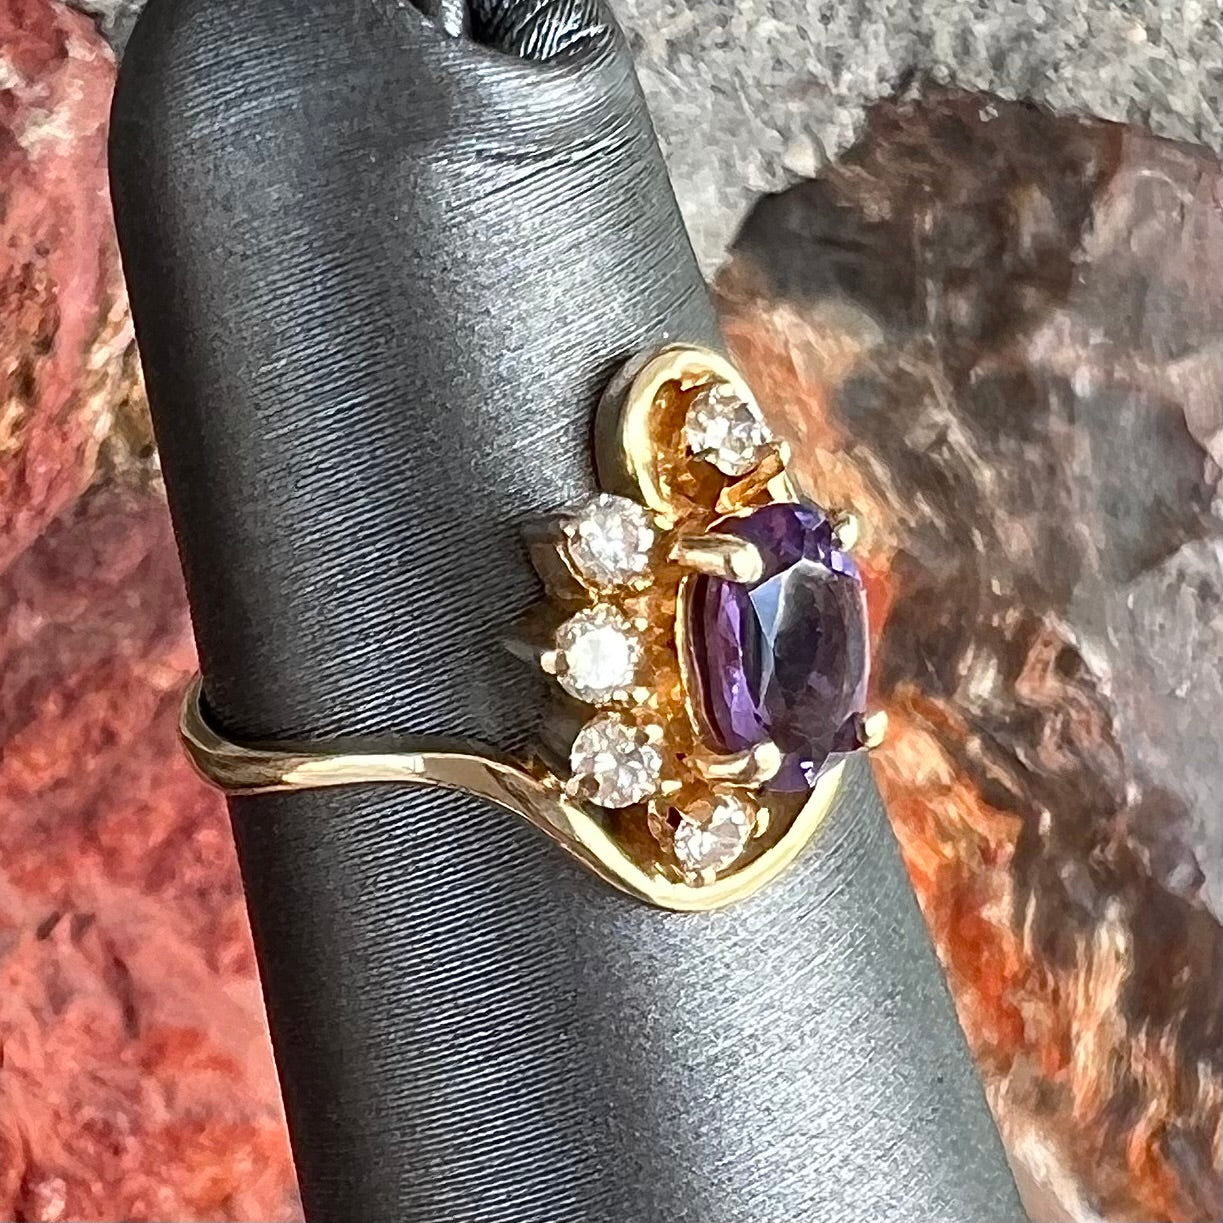 A ring made with 14 karat yellow gold, diamonds, and an amethyst.  The ring has a swoosh style.